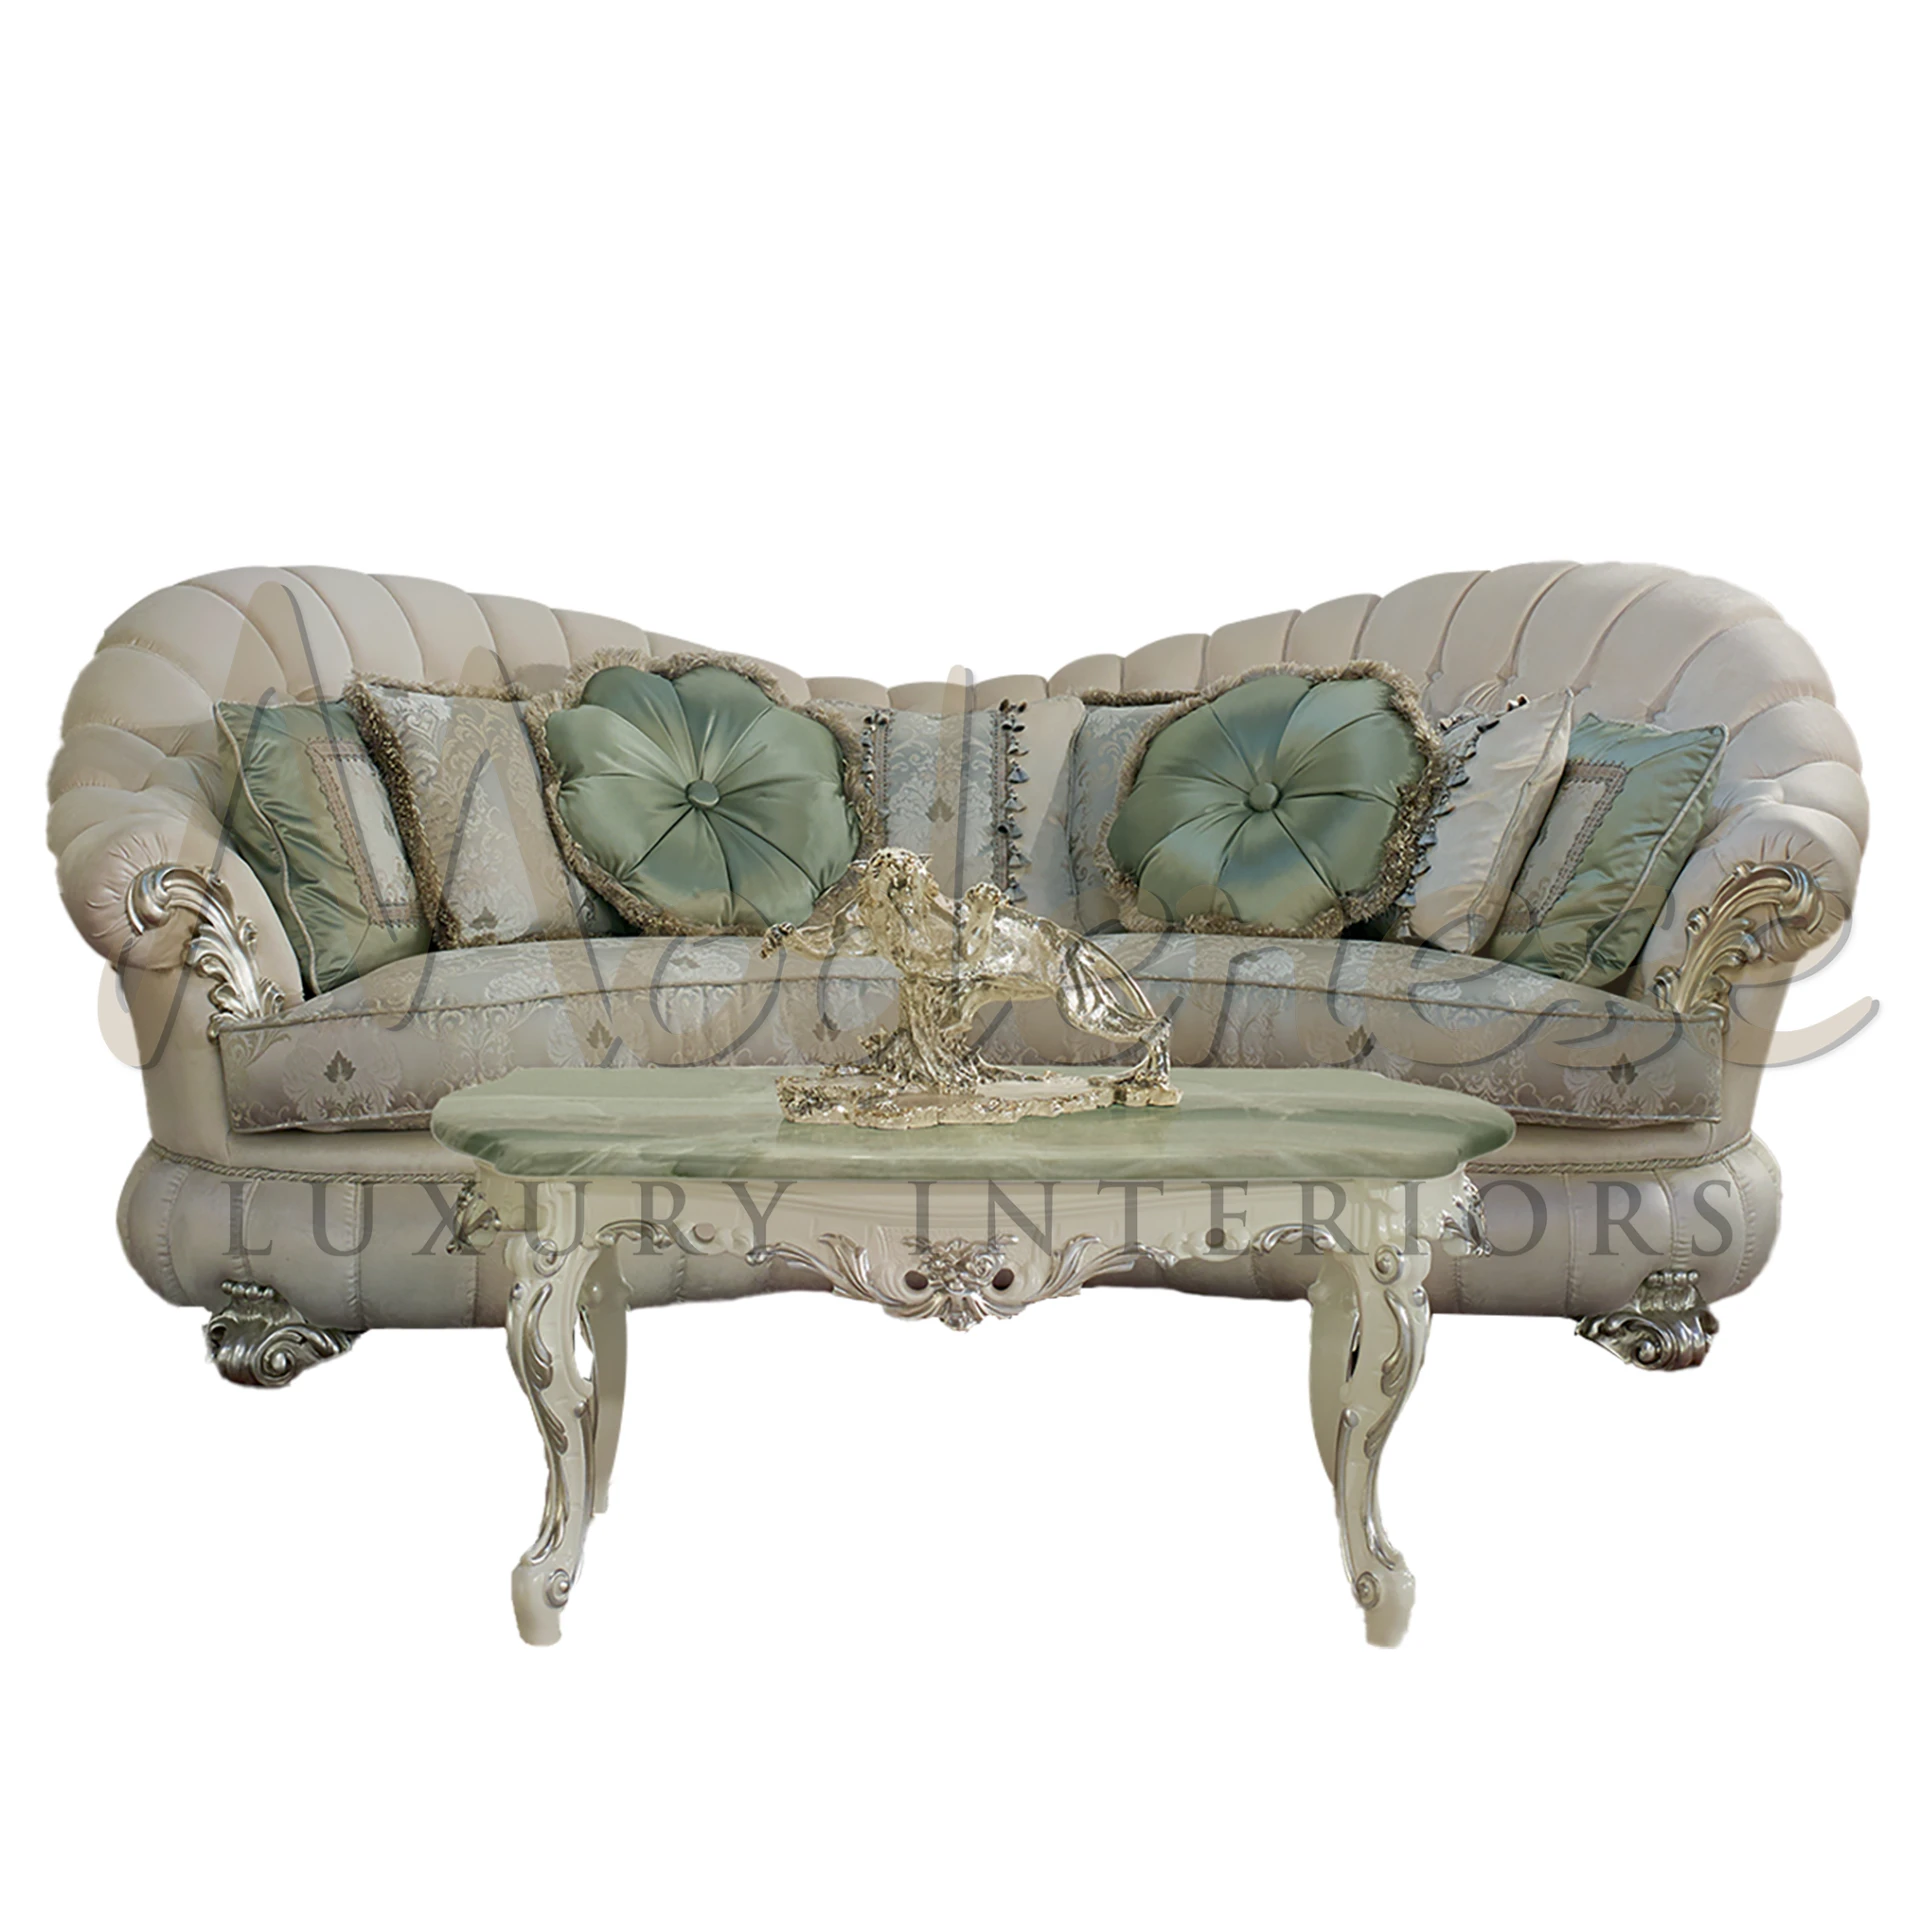 Elegant Victorian Upholstered Sofa with ornate wood carvings and silver leaf finishing, reflecting 19th-century luxury.
